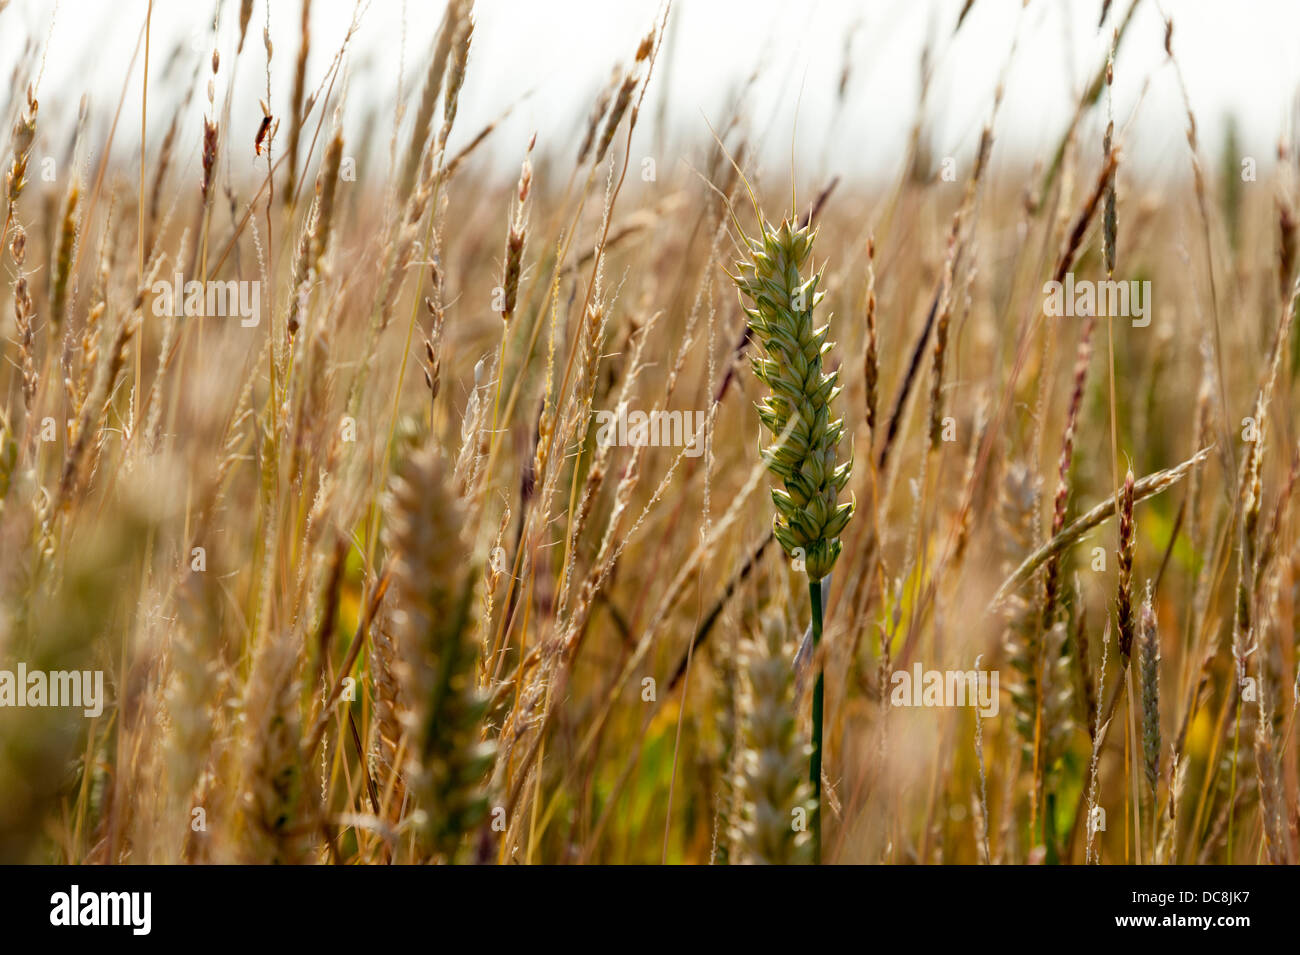 Field of ripe wheat in the UK with grass weeds Stock Photo